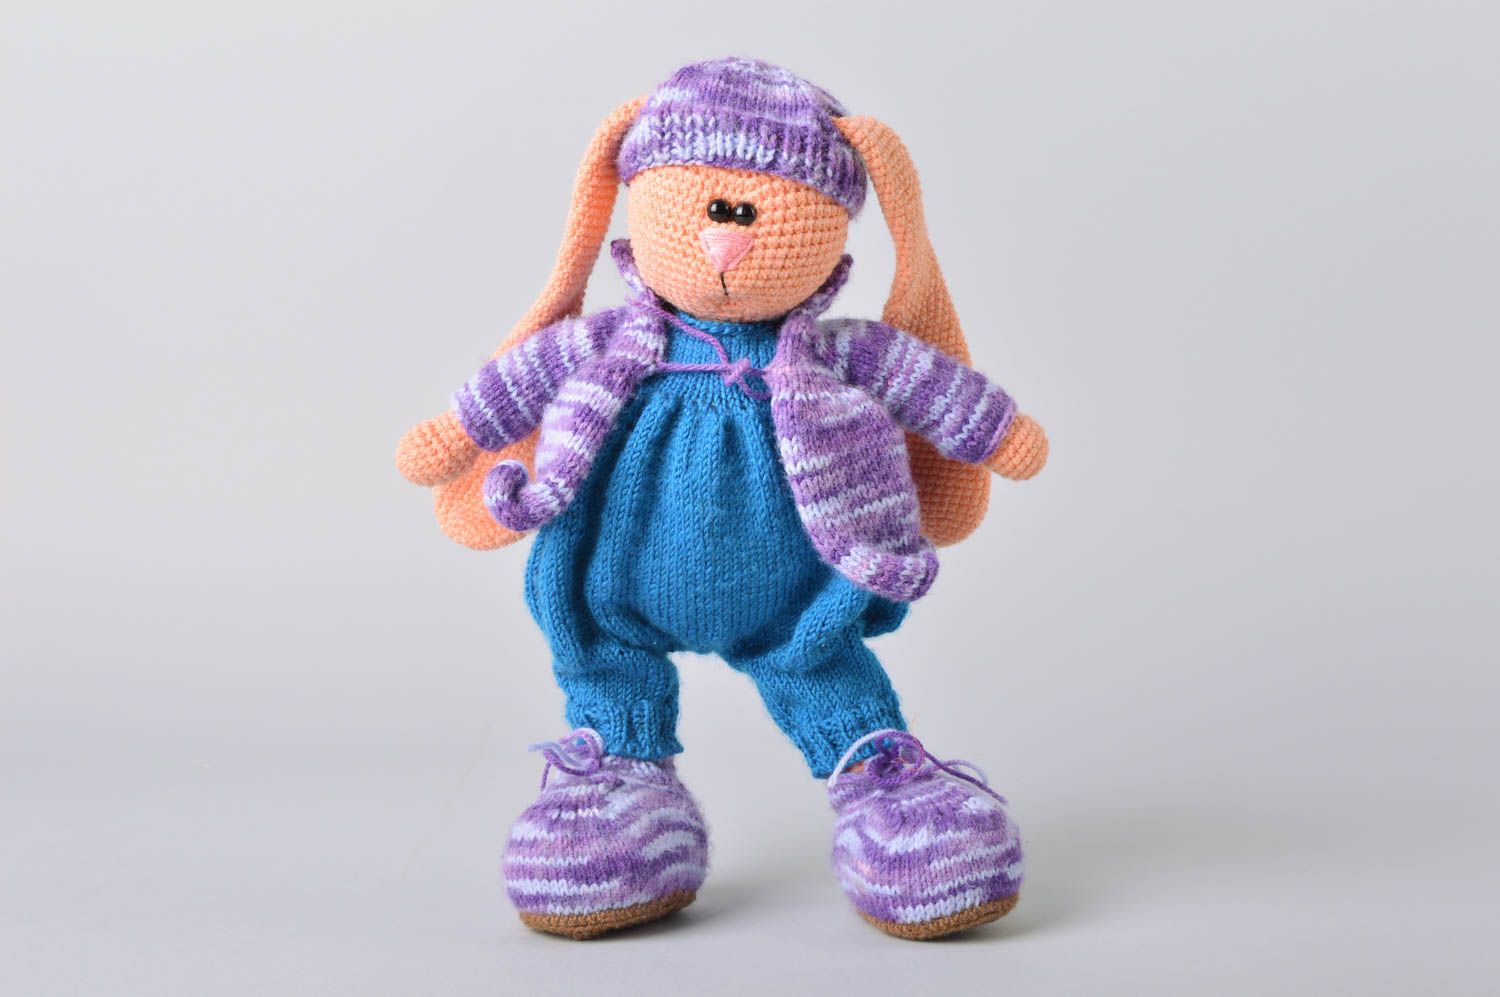 Handmade crocheted soft toy rabbit in blue knit clothing for children photo 2